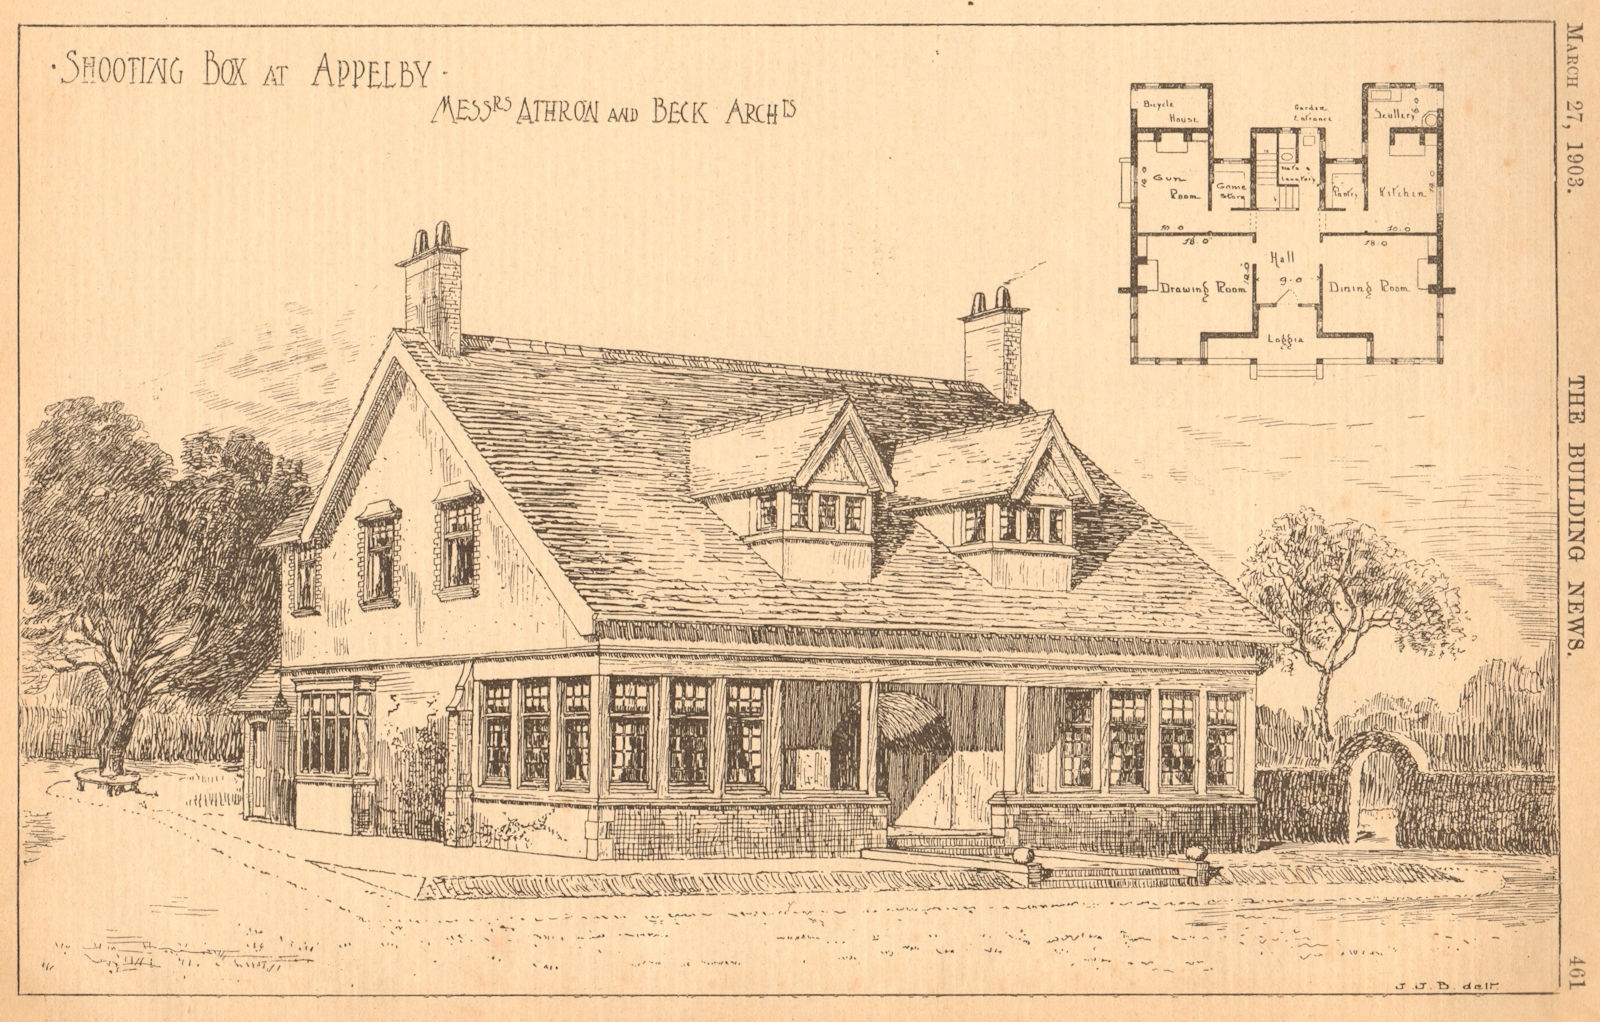 Associate Product Shooting box at Appelby, Messrs Athron & Beck Archt. Floor plan. Cumbria 1903